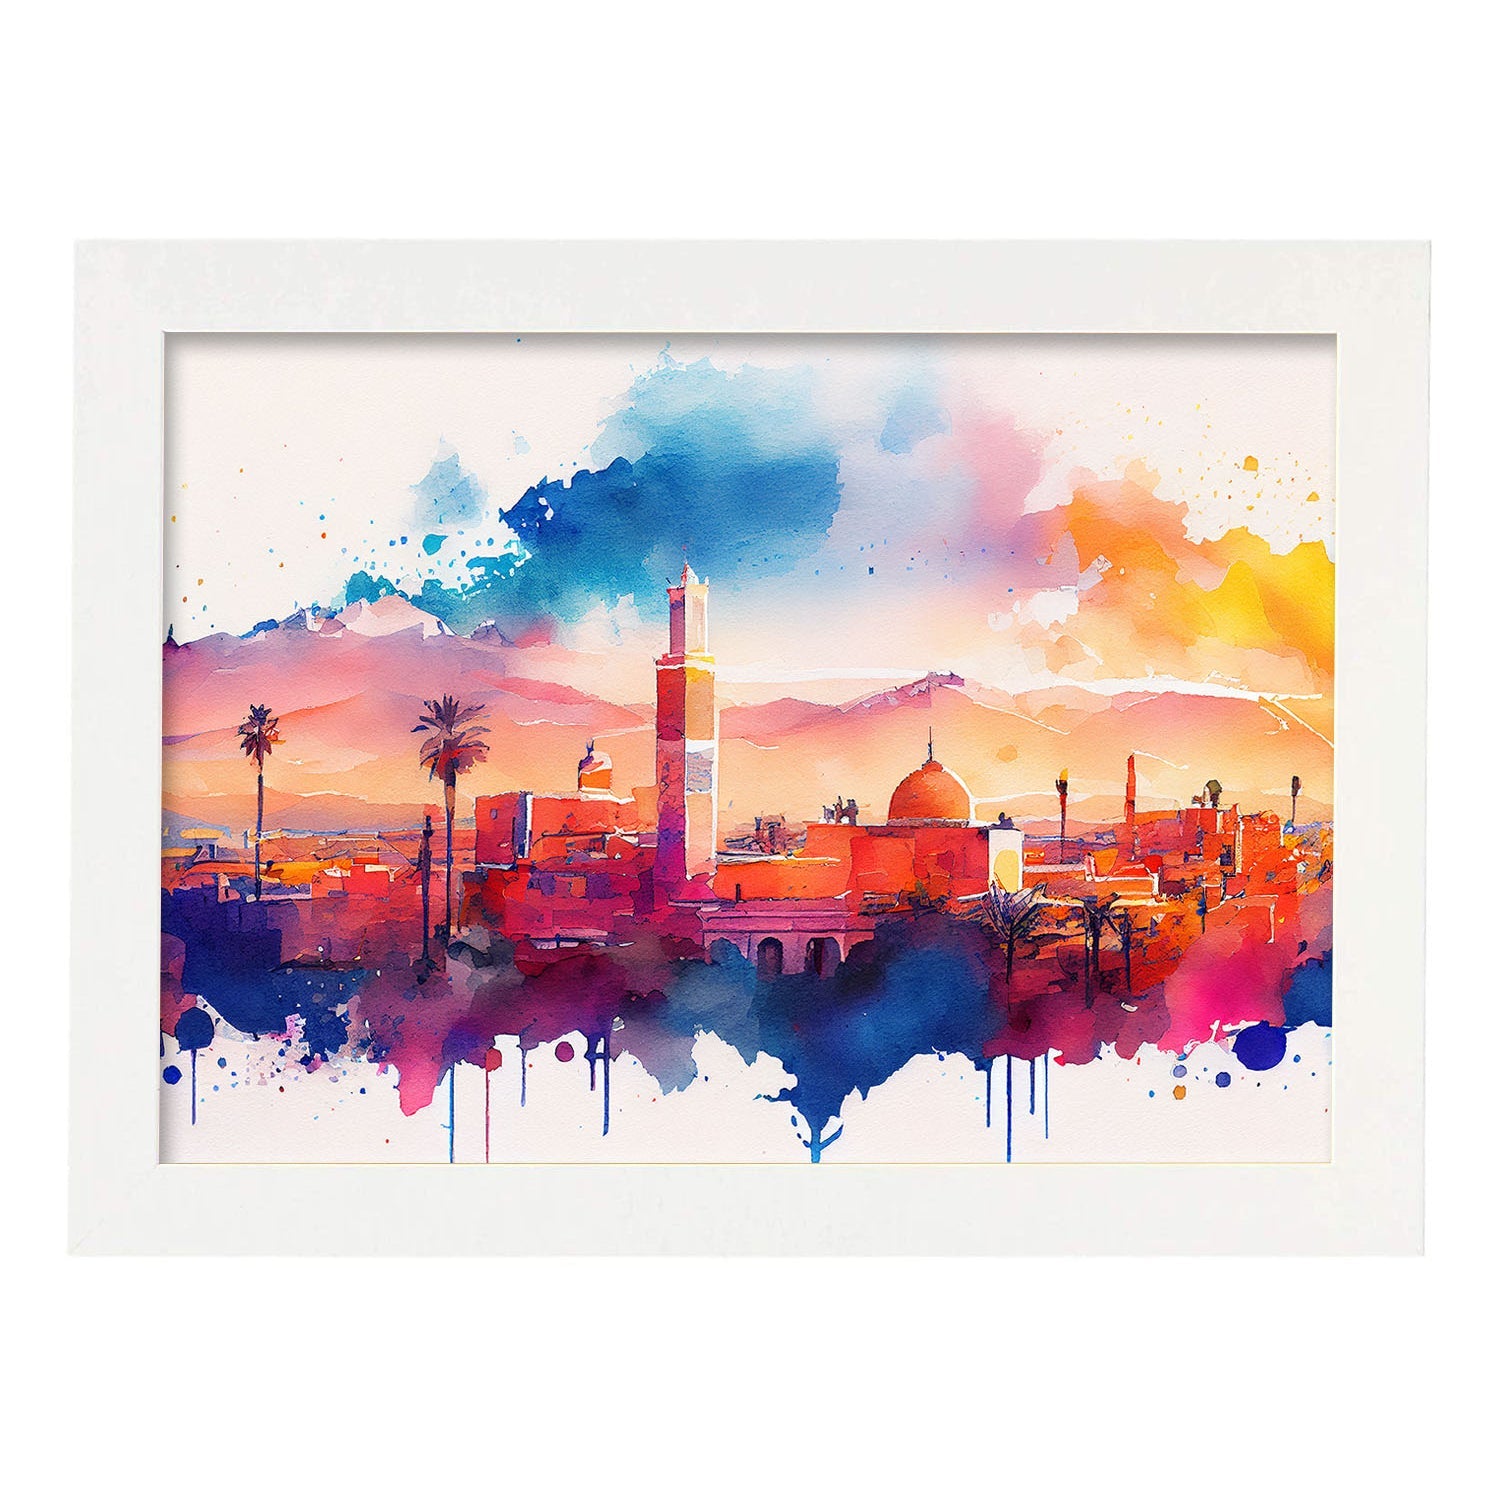 Nacnic watercolor of a skyline of the city of Marrakech. Aesthetic Wall Art Prints for Bedroom or Living Room Design.-Artwork-Nacnic-A4-Marco Blanco-Nacnic Estudio SL